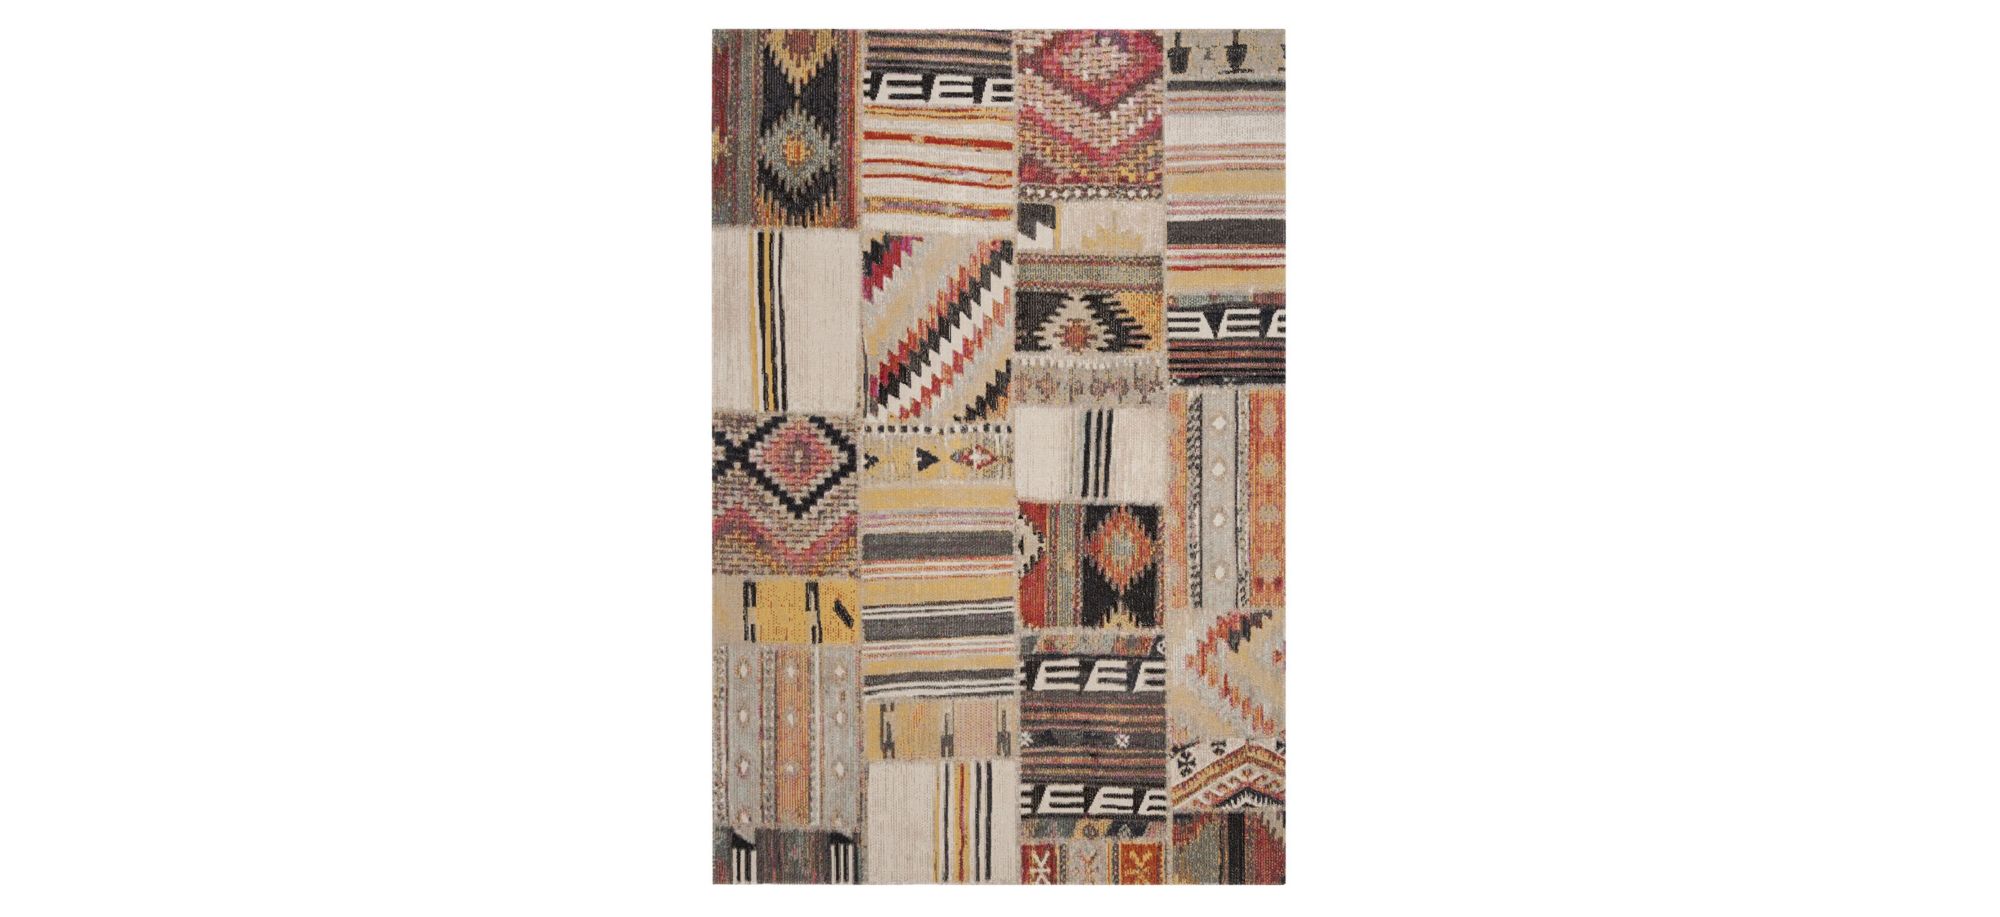 Montage II Area Rug in Taupe & Multi by Safavieh